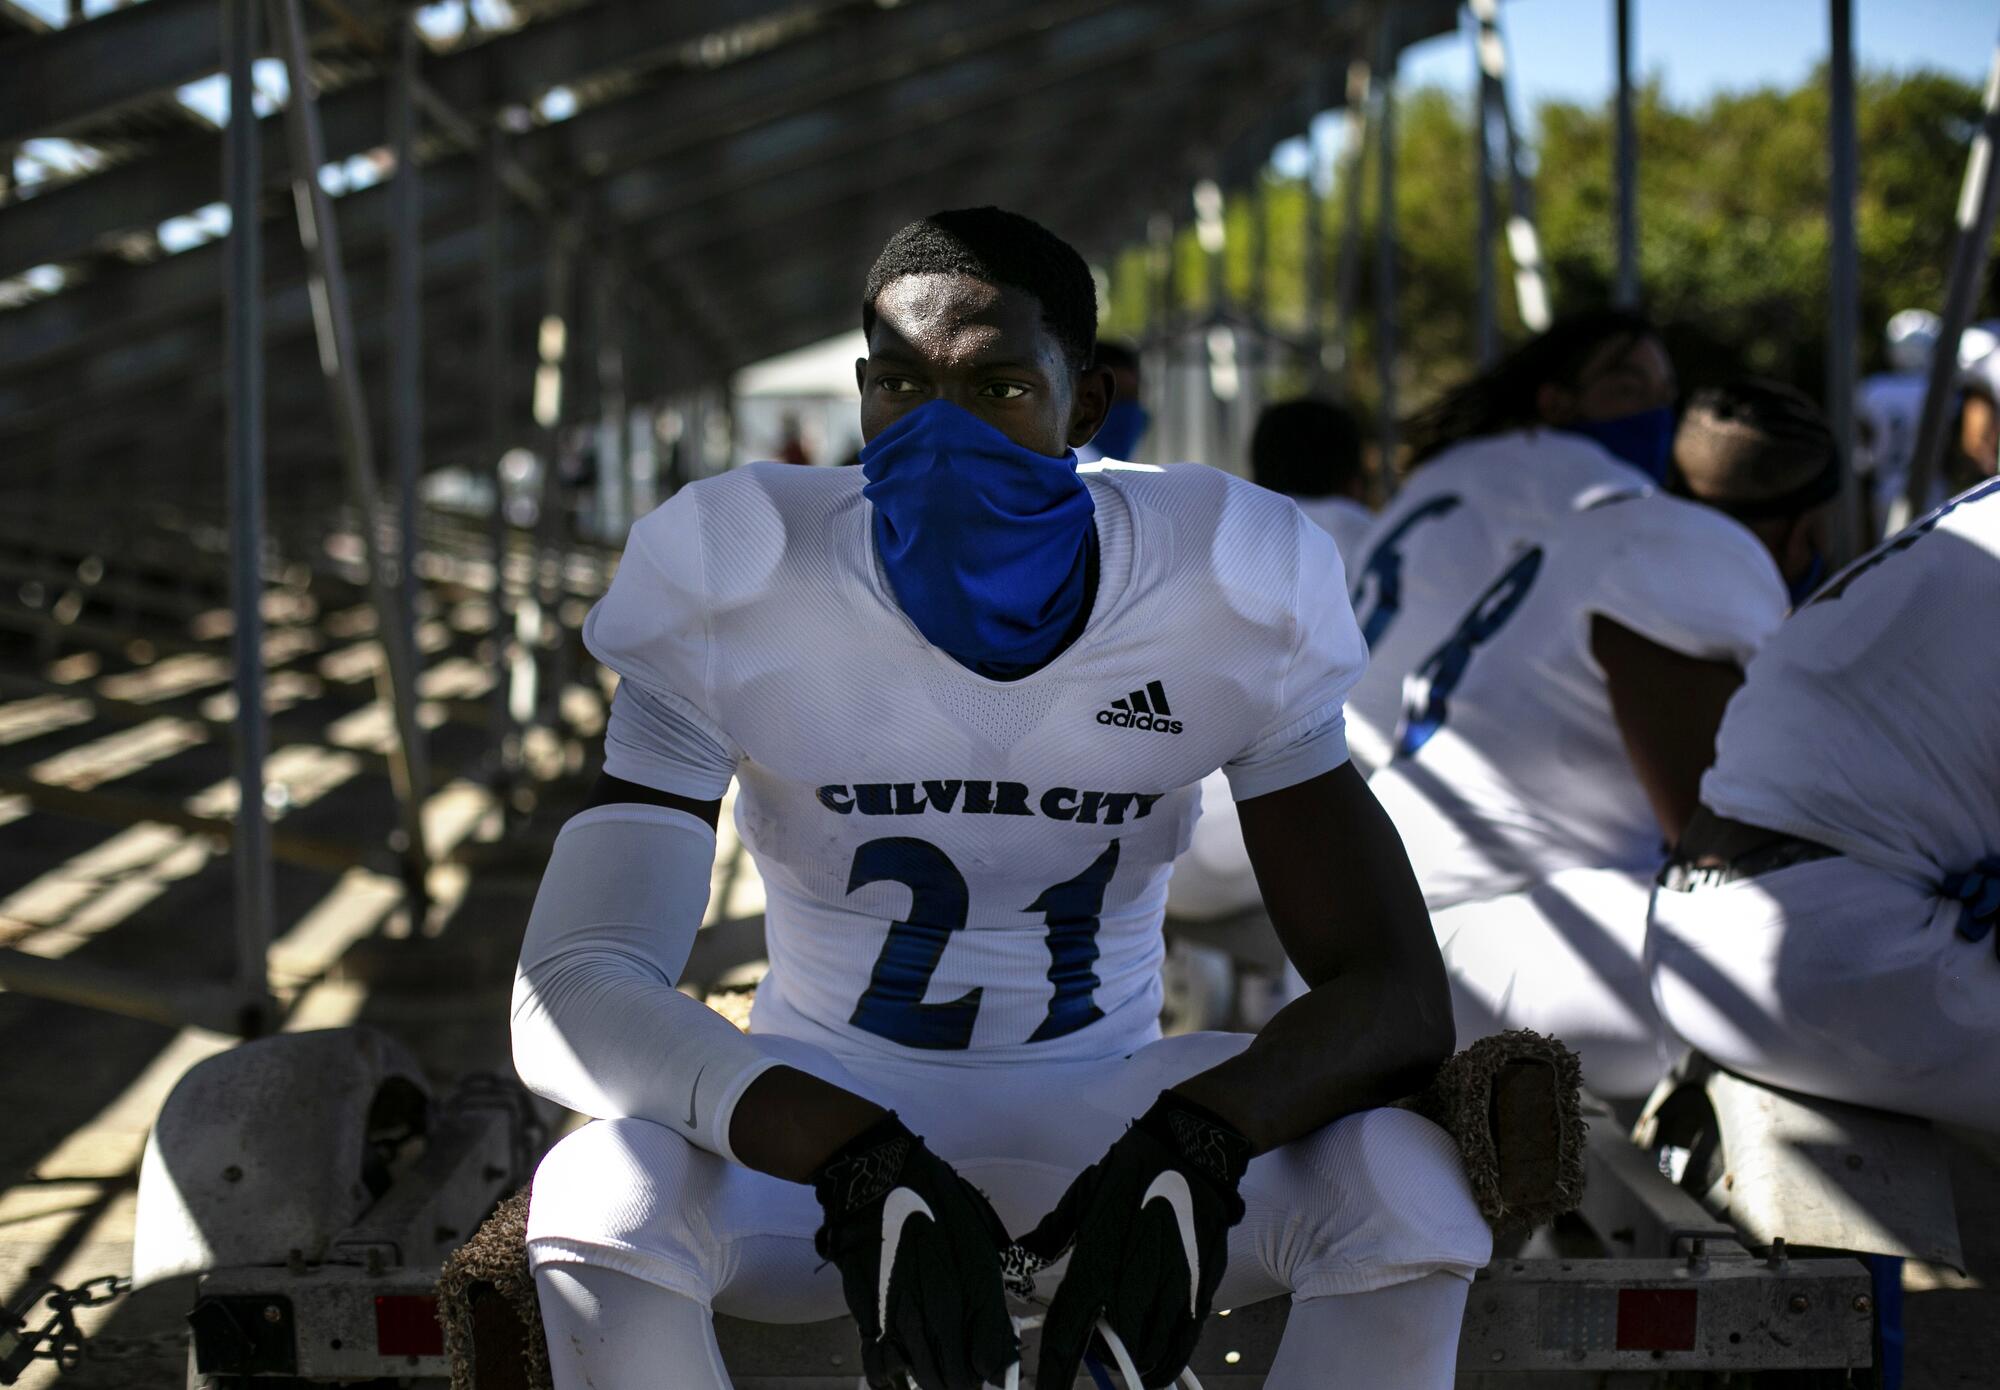 Prince Okorie (21) quietly sits under the bleachers with his team before taking the field.